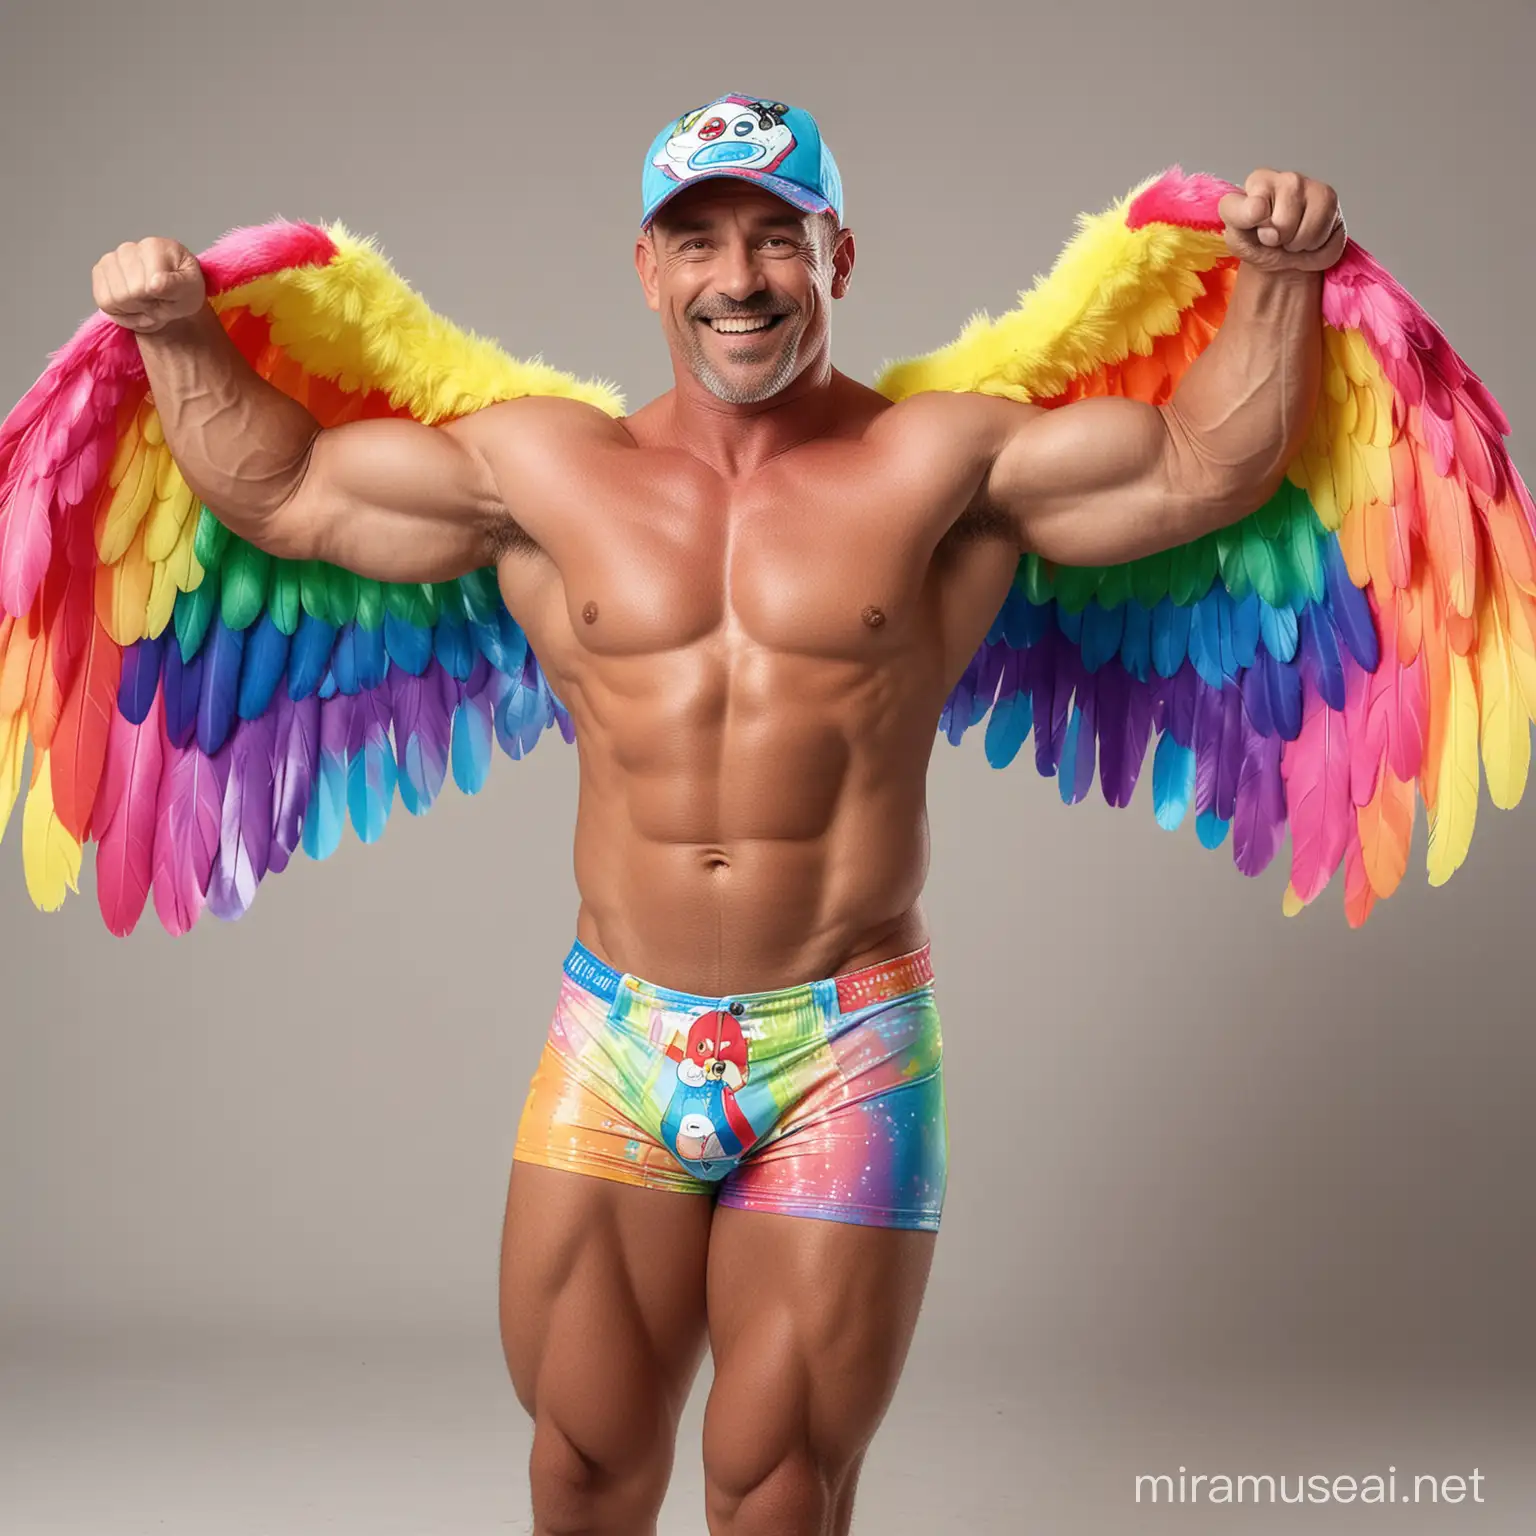 Muscular 40s Bodybuilder Flexing Strong Arm with RainbowColored Eagle Wings Jacket